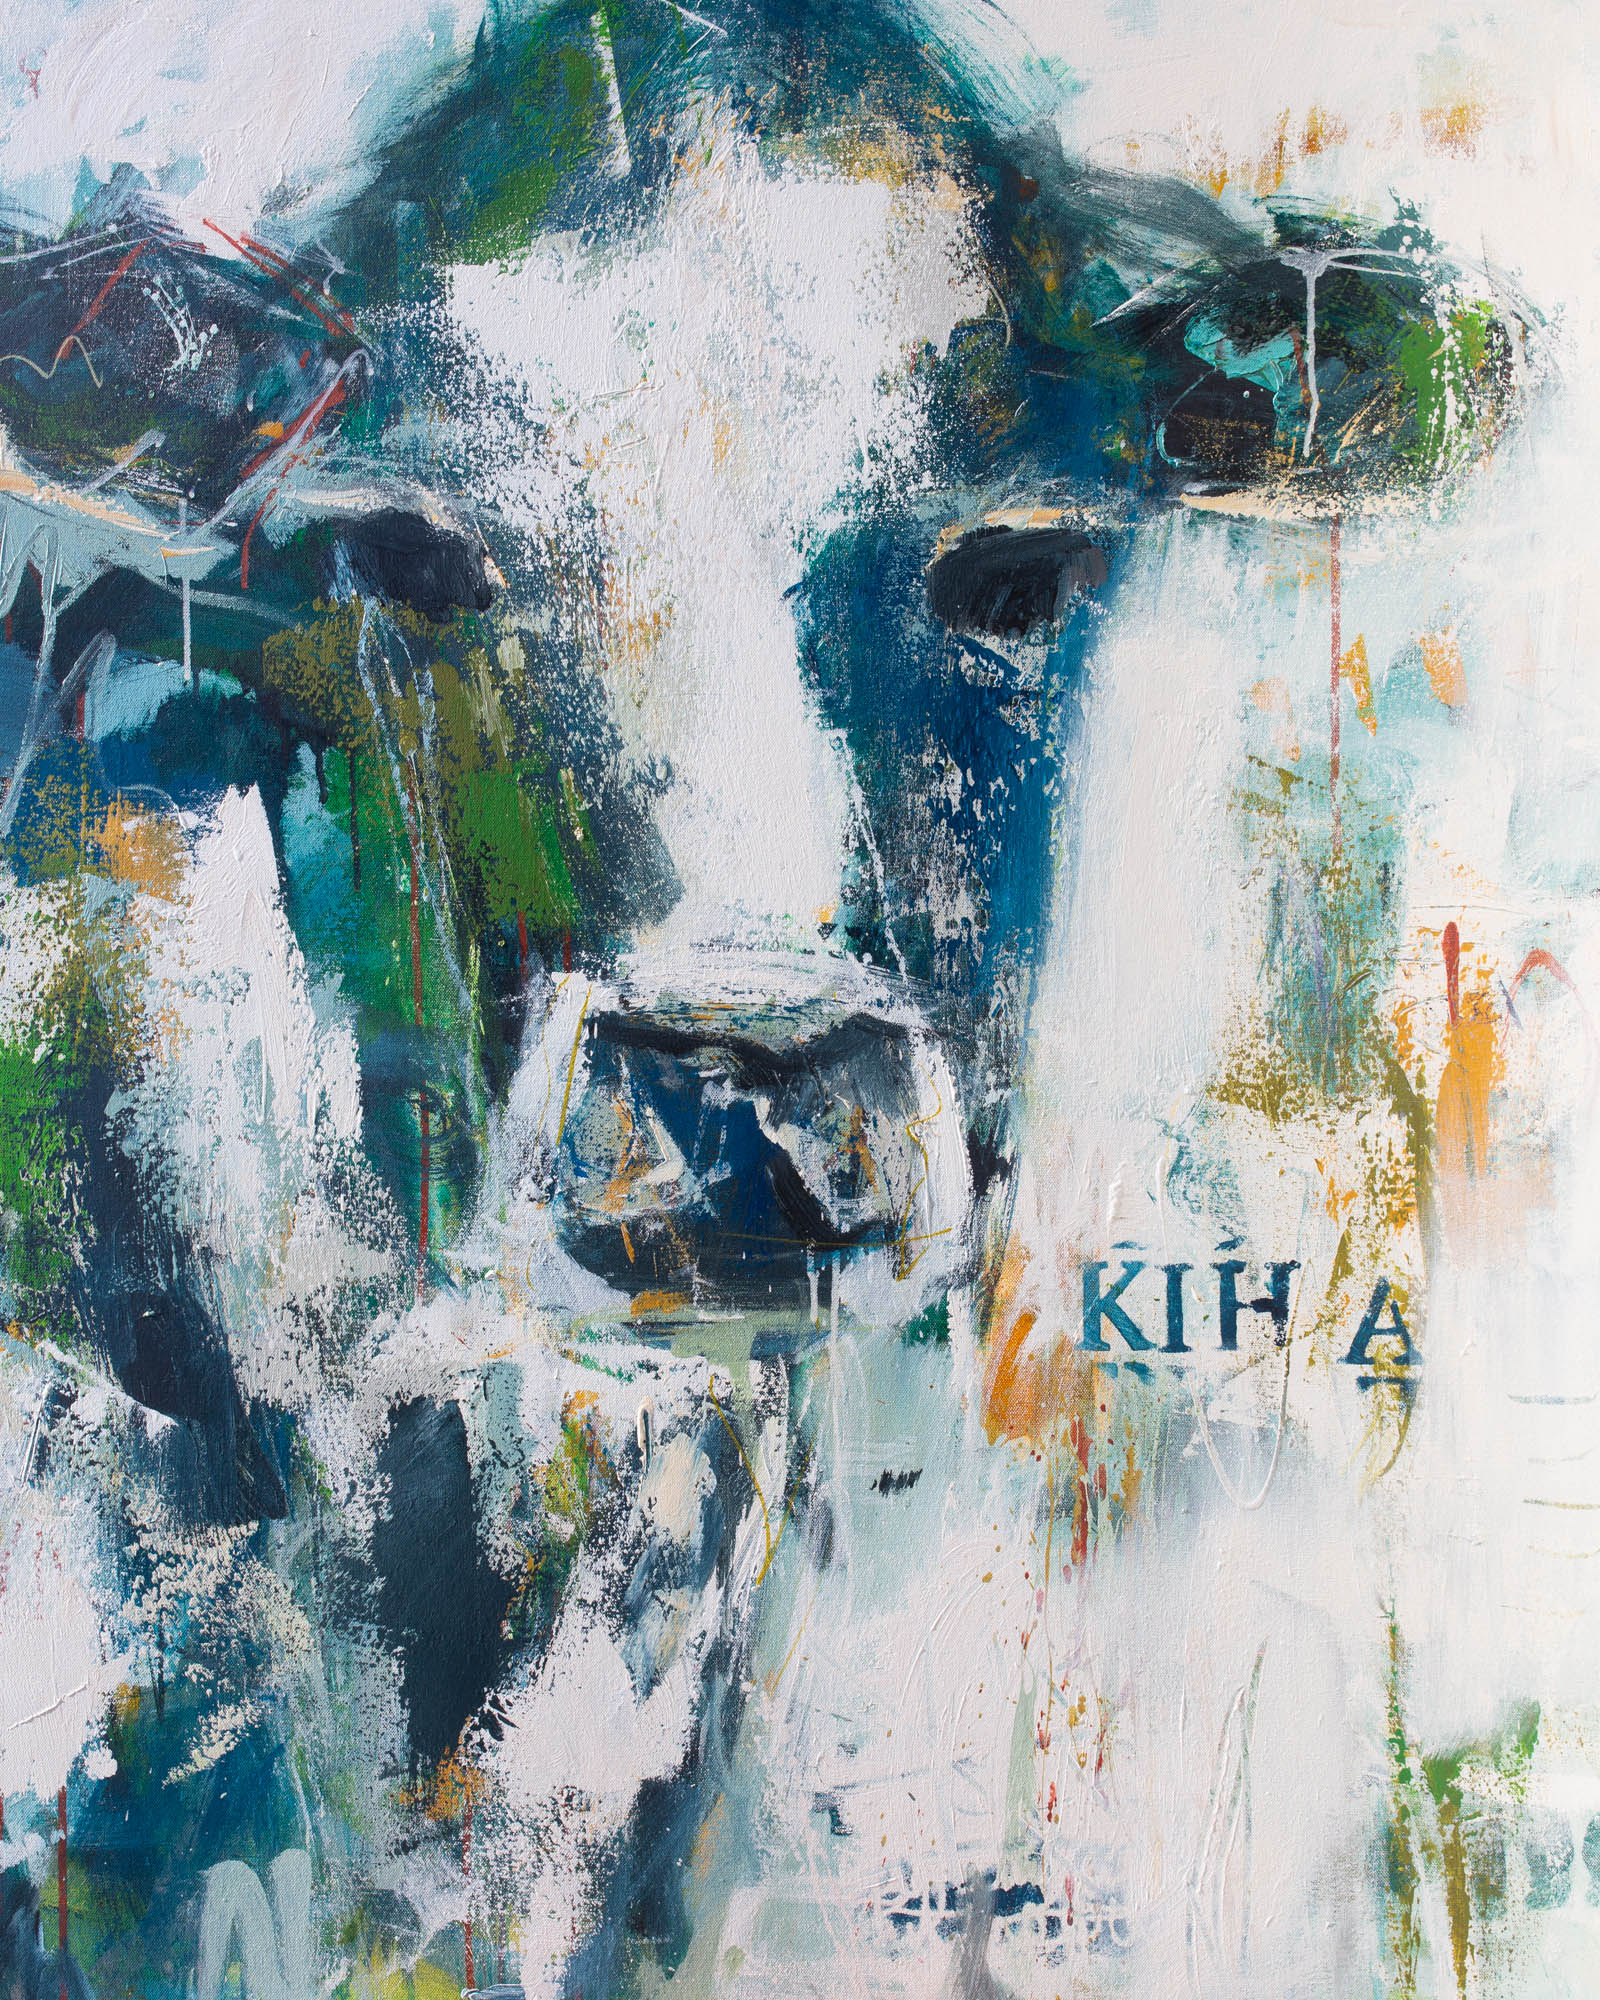 Kiha  - Abstract Cow by Australian Artist Rose Hewartson Original Abstract Painting on Canvas Framed 96x123 cm Statement Piece